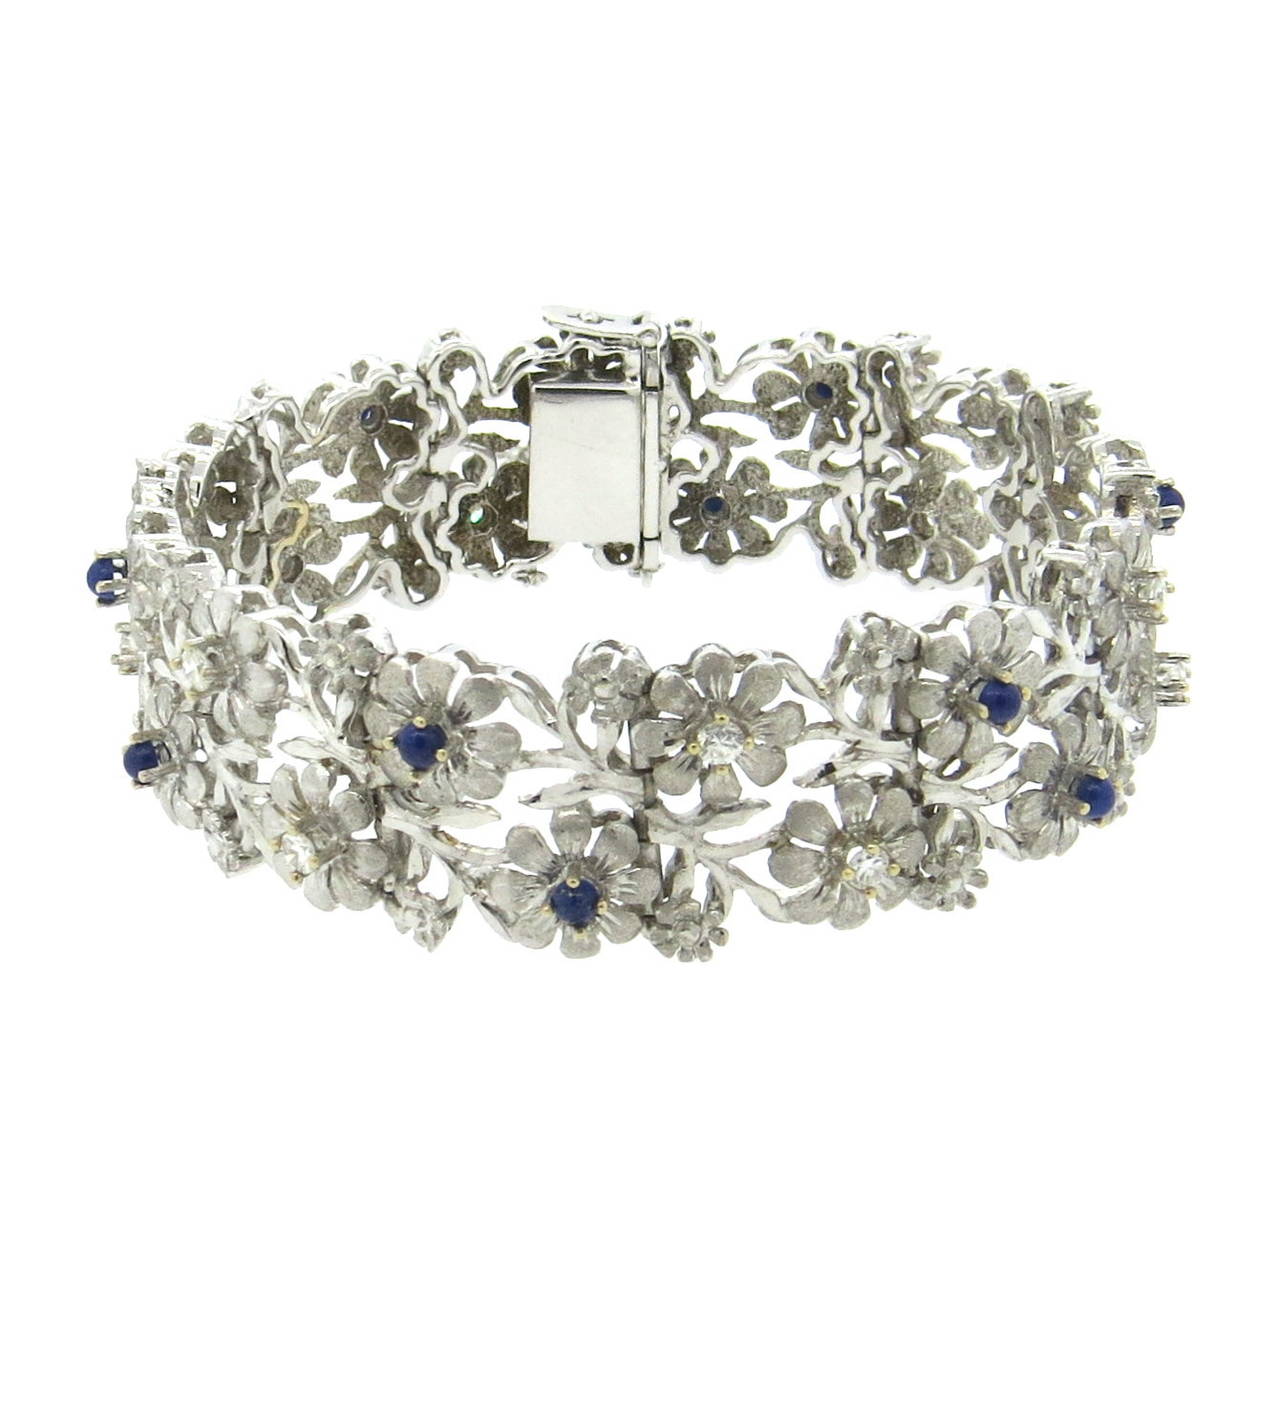 European circa 1960s bracelet, crafted in 18k white gold, featuring flower design, set with lapis lazuli and approximately 0.75ctw in diamonds. Bracelet is 7 1/8